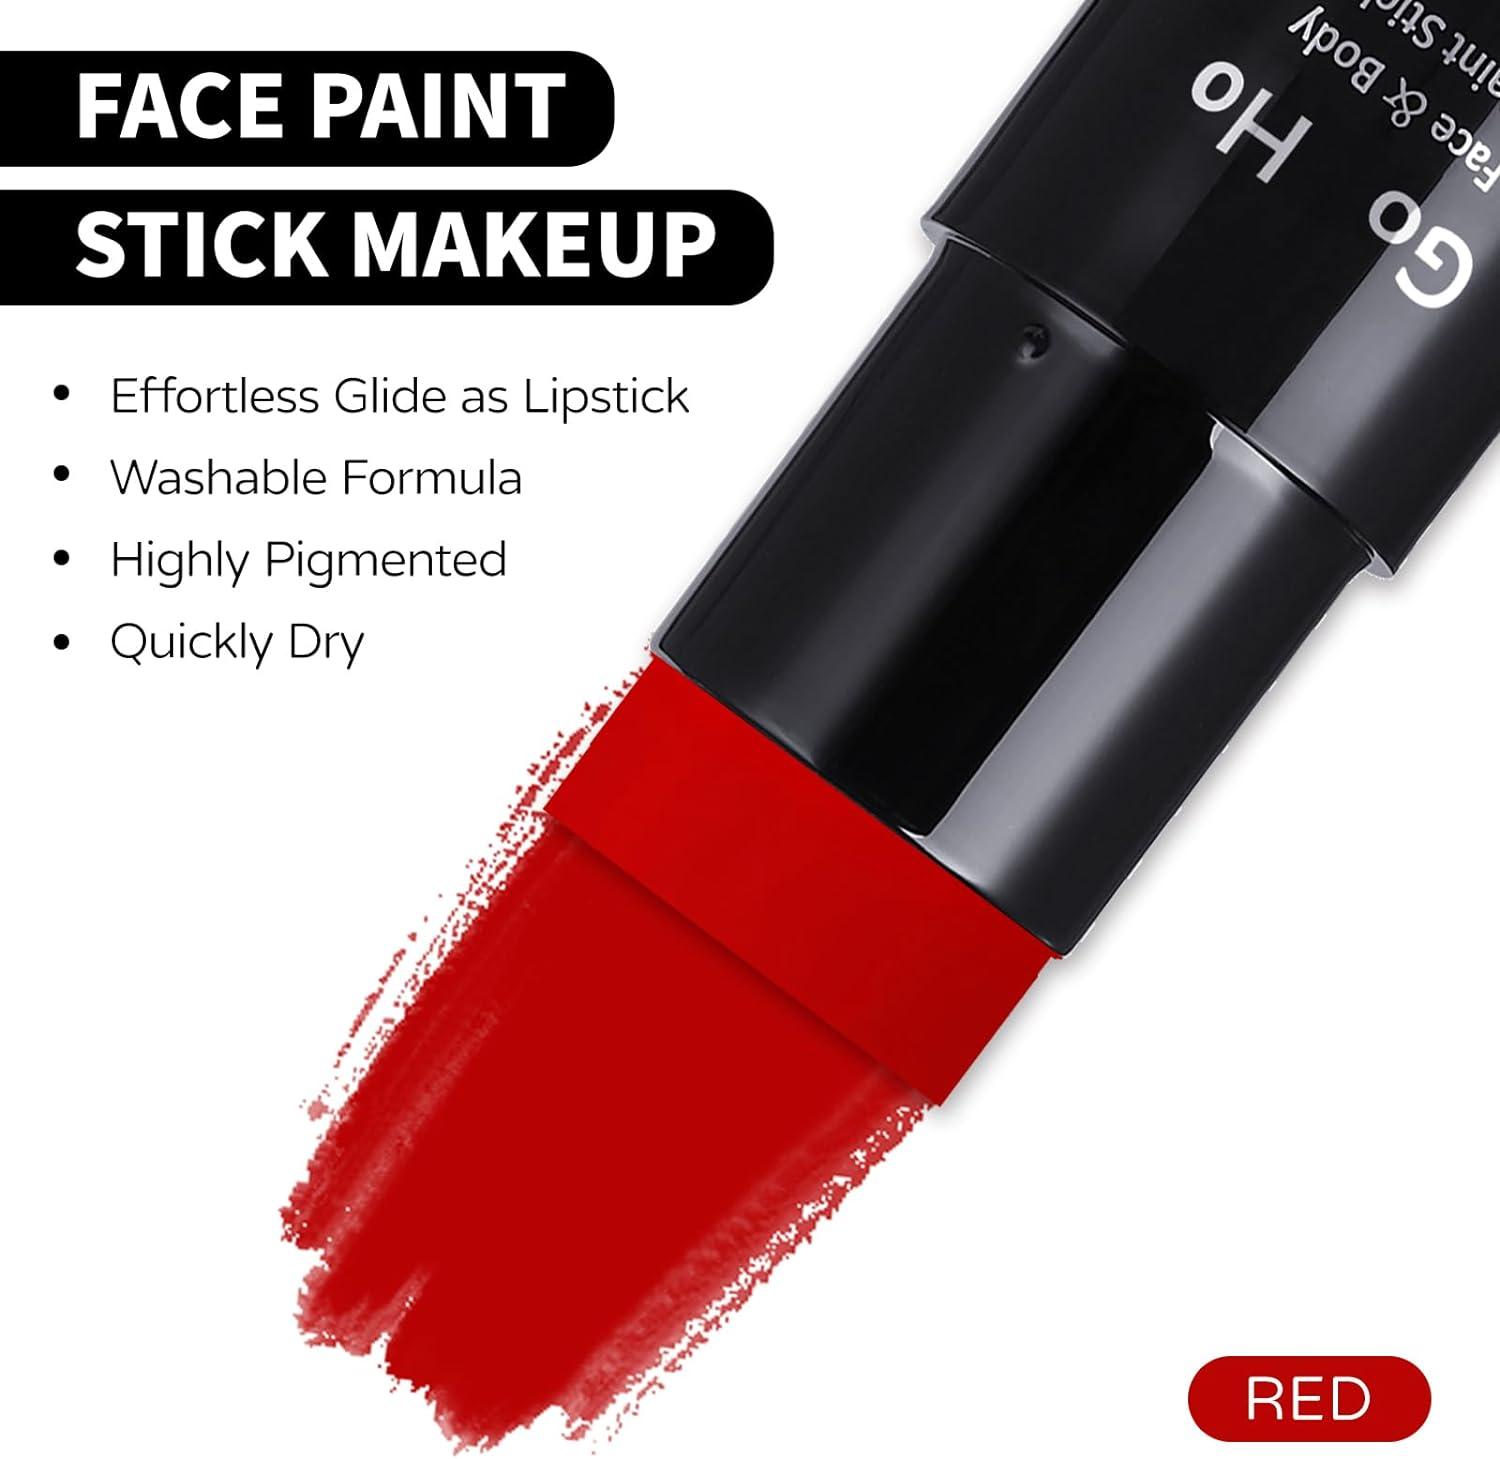 Go Ho Water Based Red Face Paint Stick Washable (1.06 Oz) Non